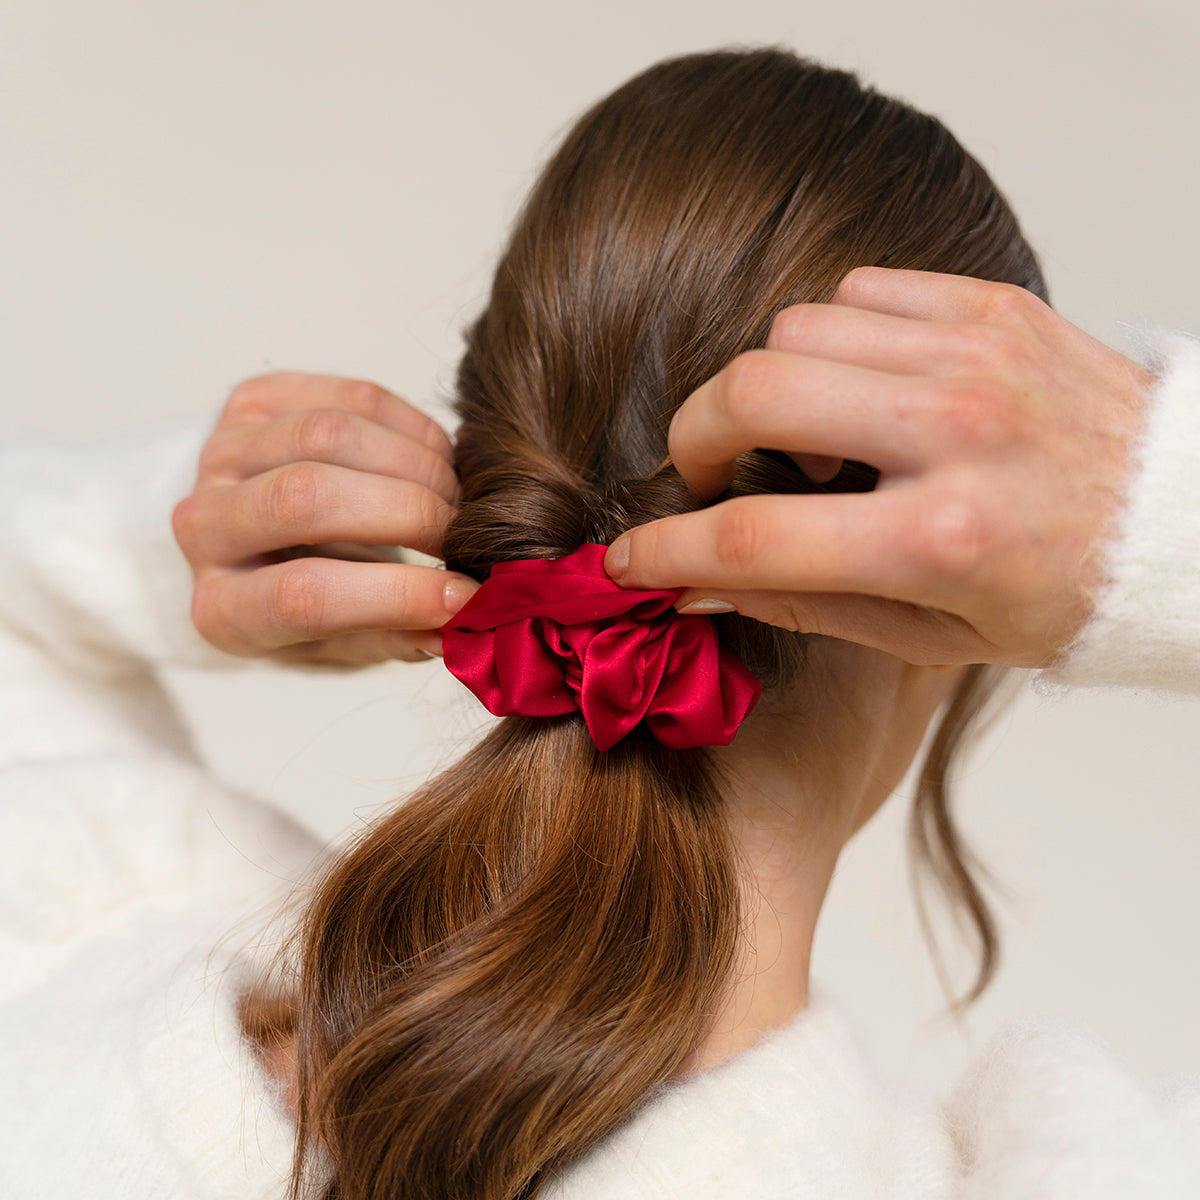 Hair scrunchies are perfect gifts for women with medium or long hair - on sale now 30% off!